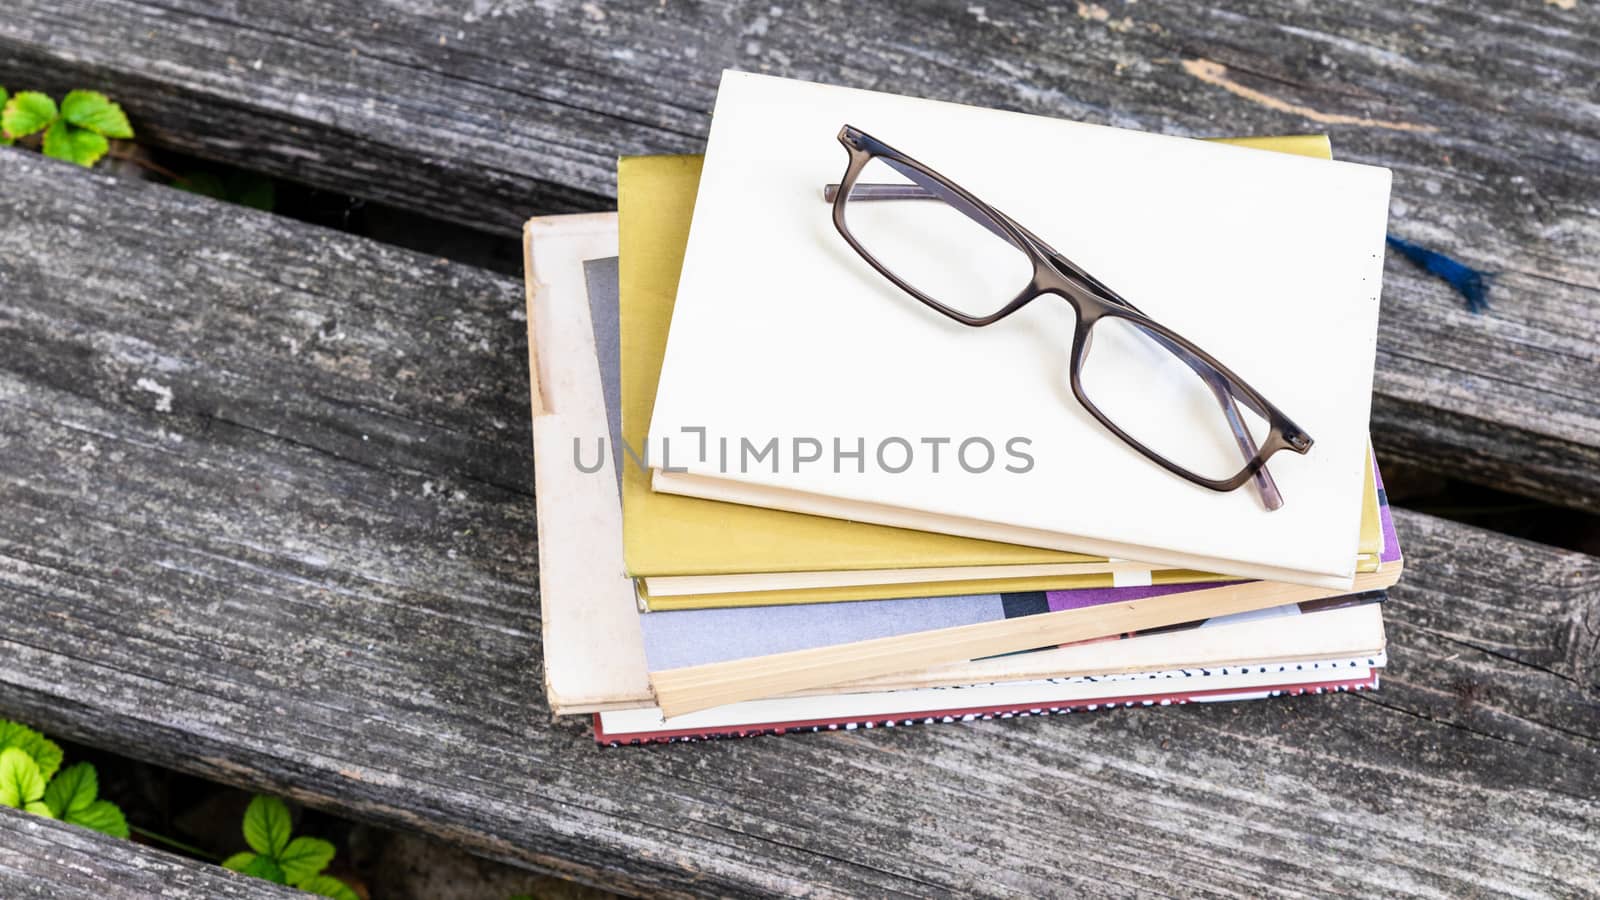 books and reading glasses by magann